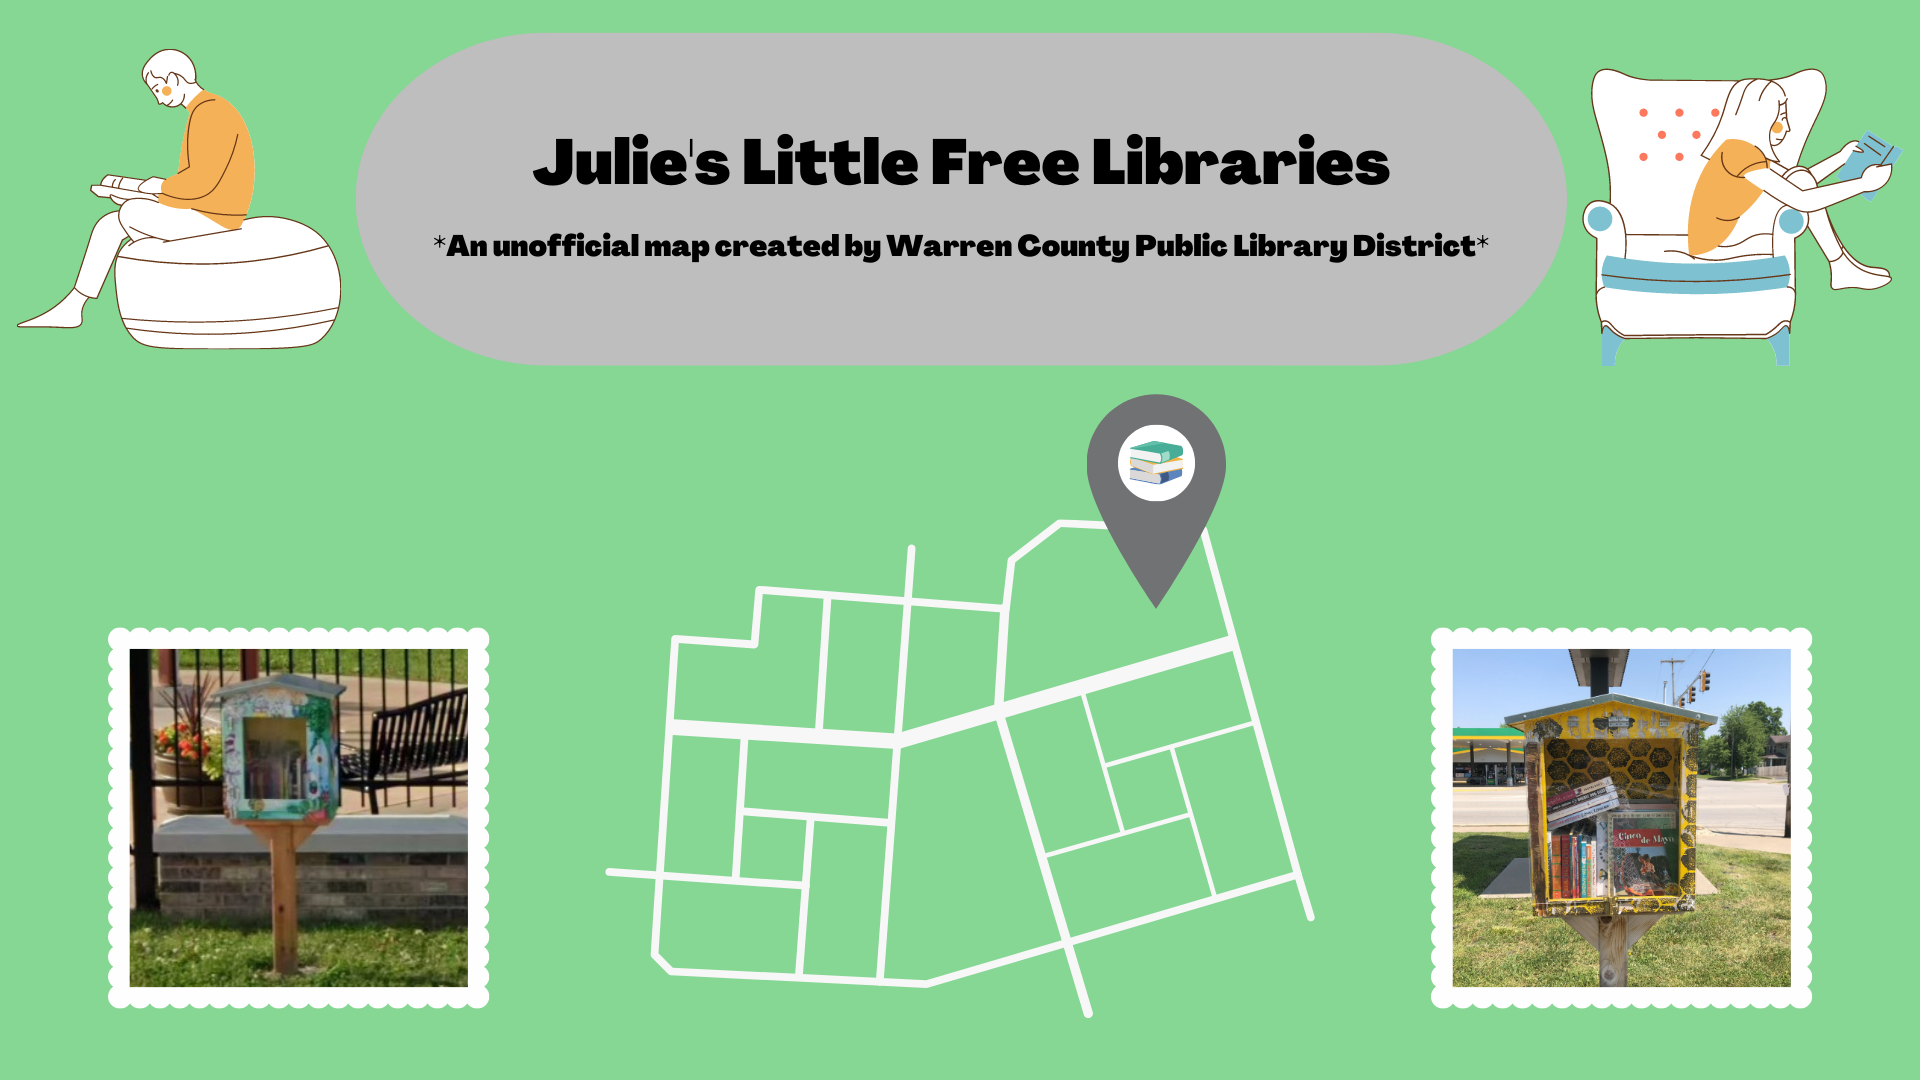 Julie’s Little Free Libraries-Monmouth, IL